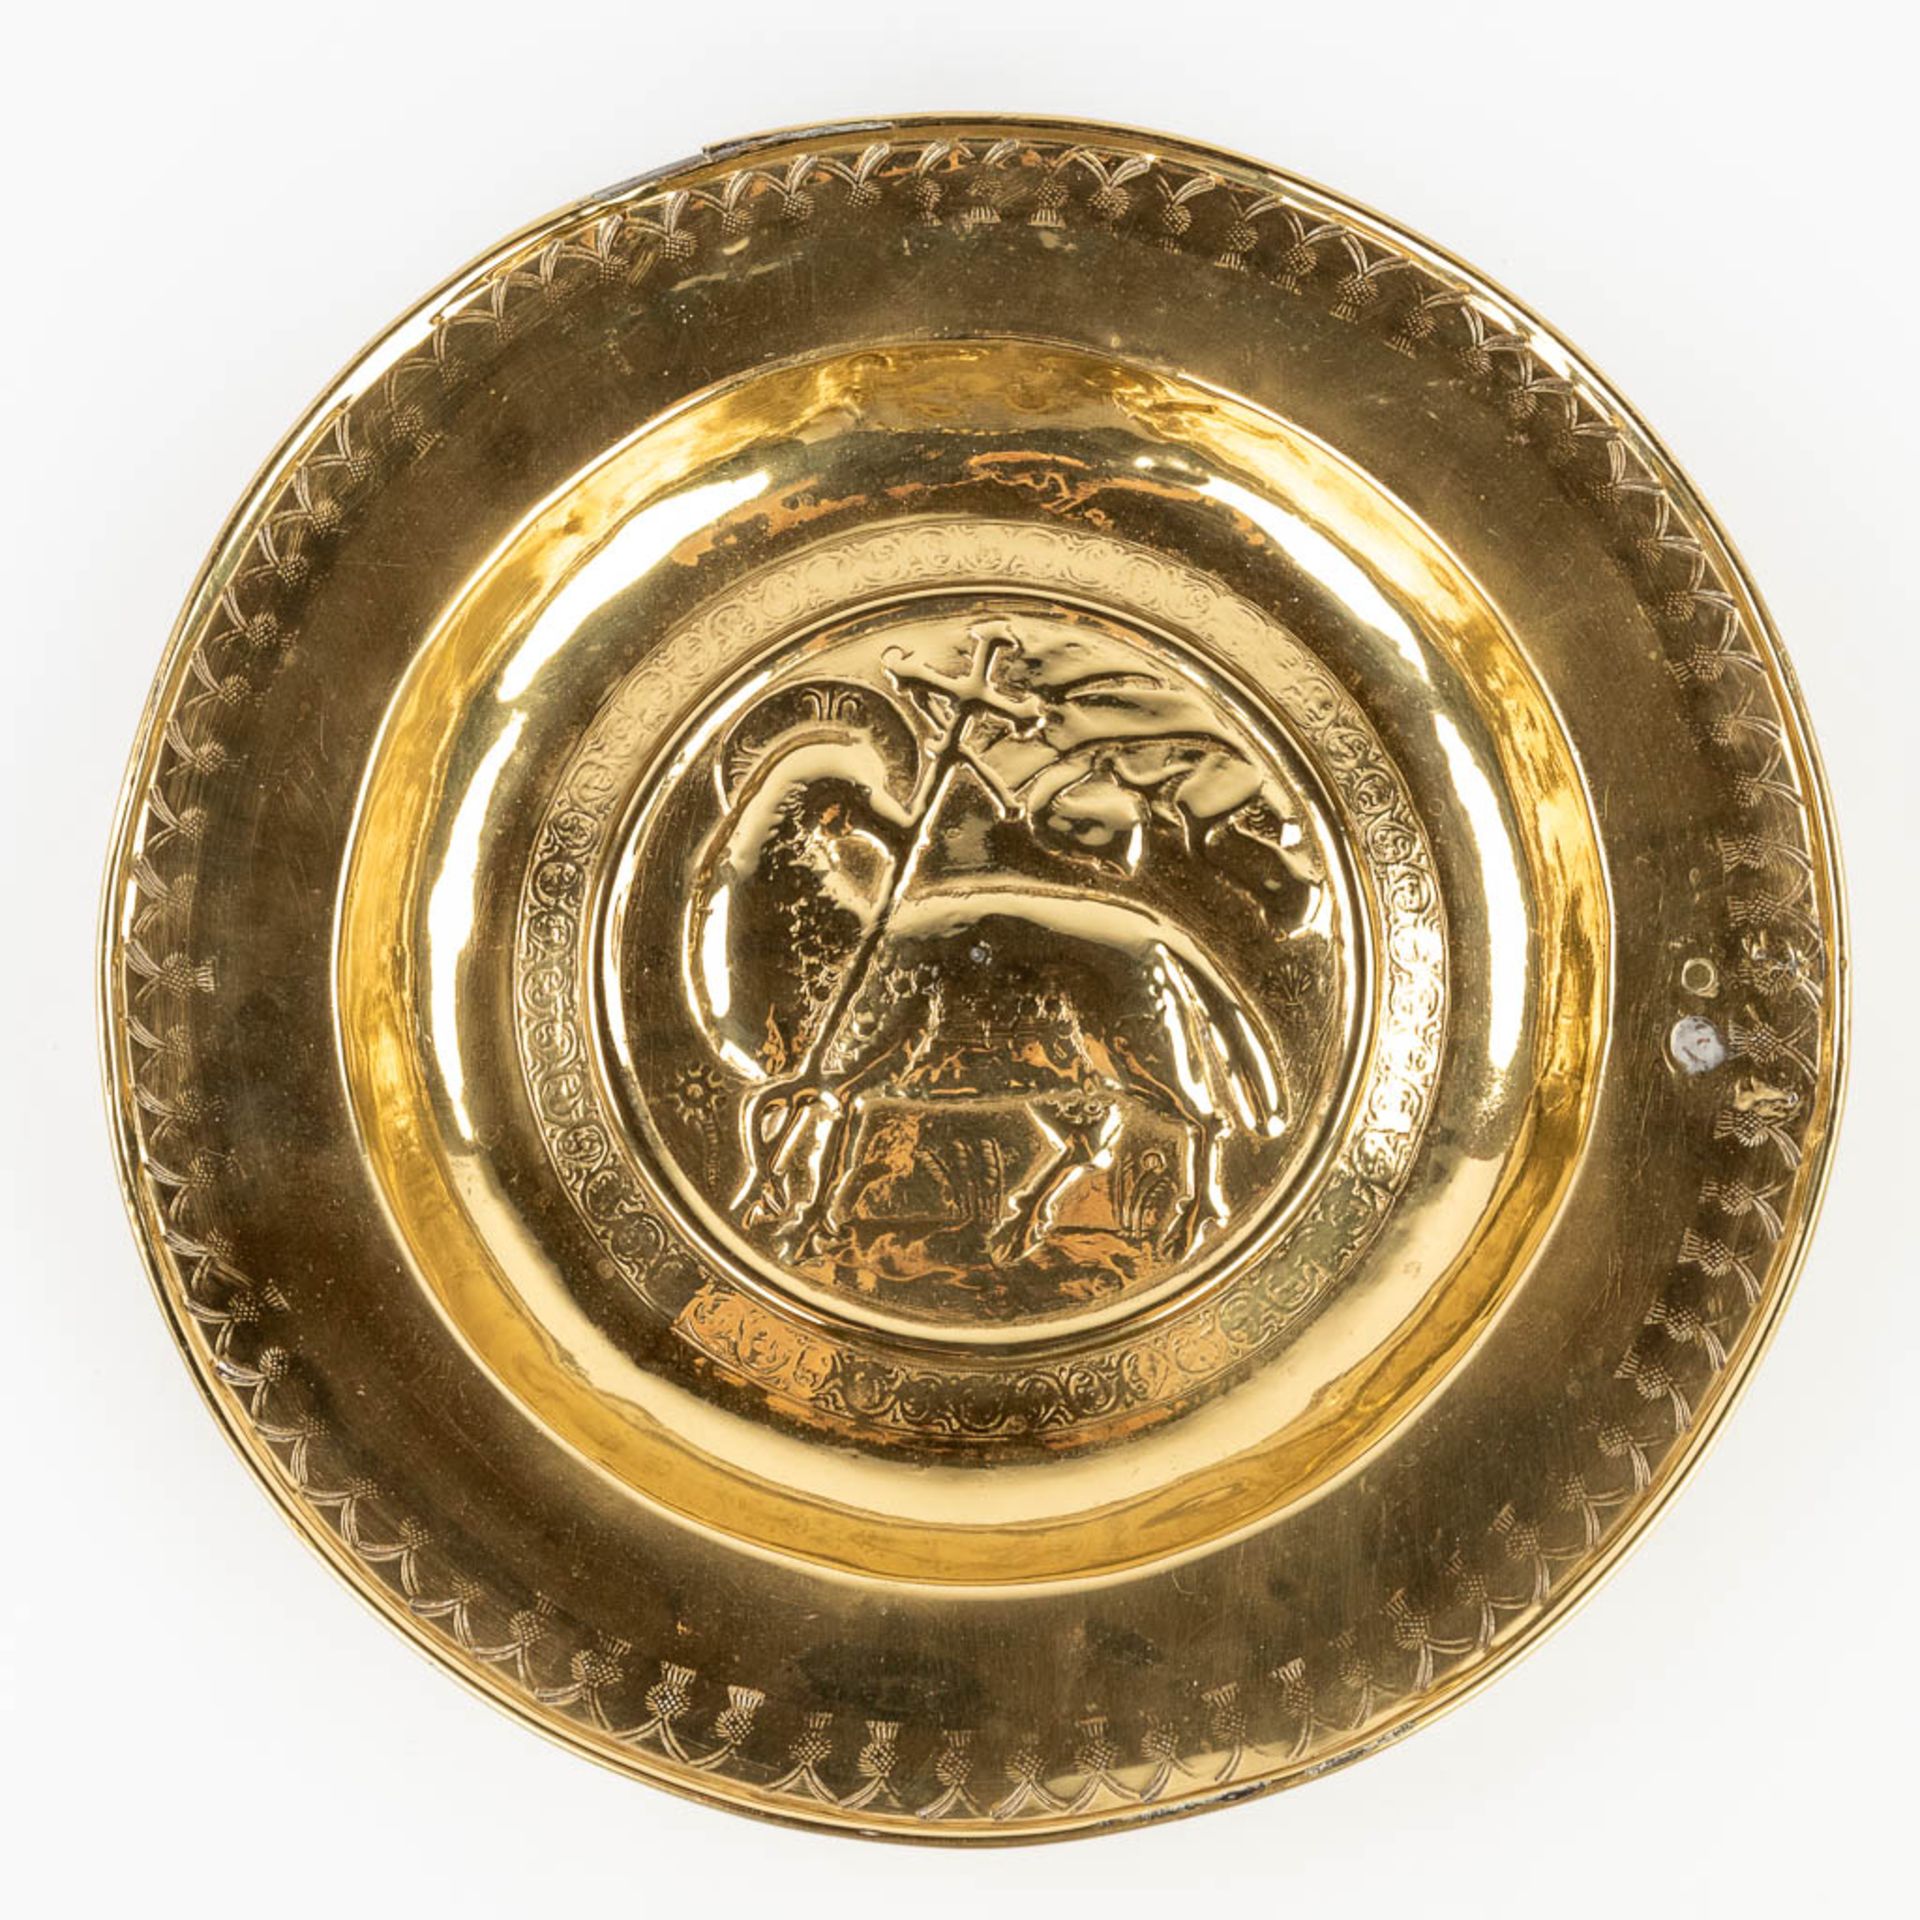 A large baptism bowl, Brass, images of the Holy Lamb. 16th/17th C. (H: 3,7 x D: 37 cm)